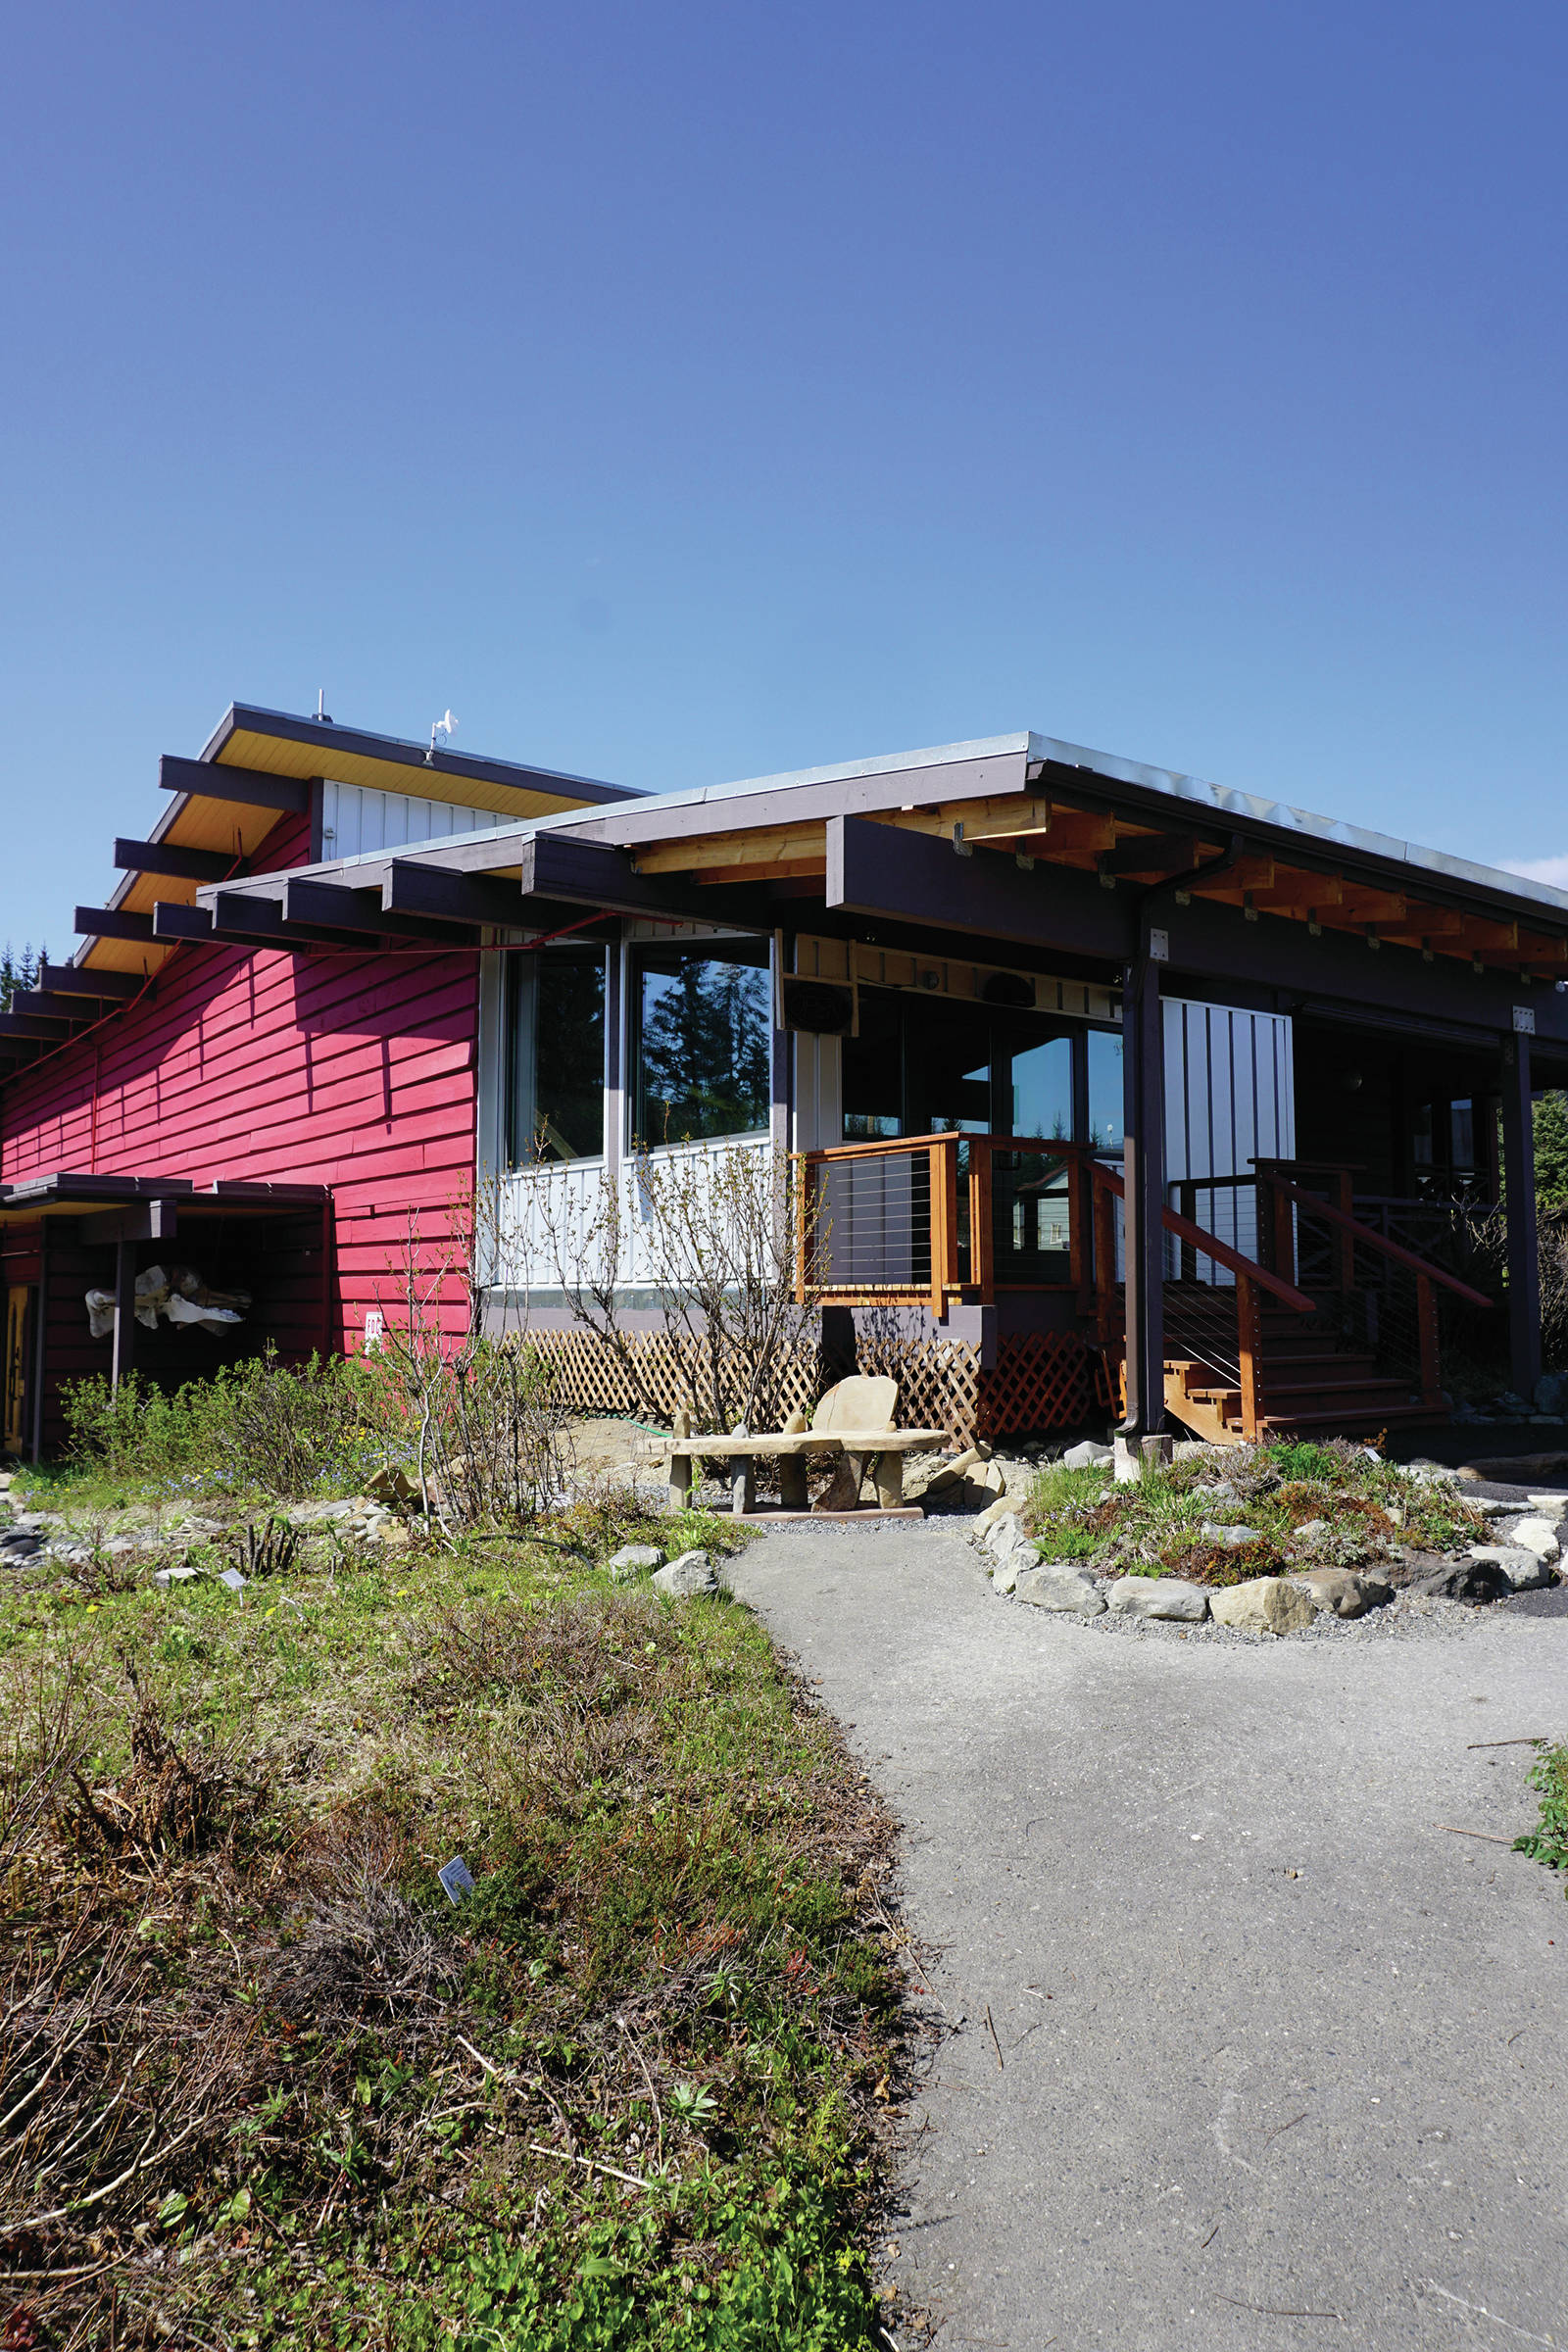 Though the inside of the Pratt Museum remains closed, outside features like the botanical gardens — seen here on May 15, 2020, in Homer, Alaska — and the forest trail remain open. (Photo by Michael Armstrong/Homer News)